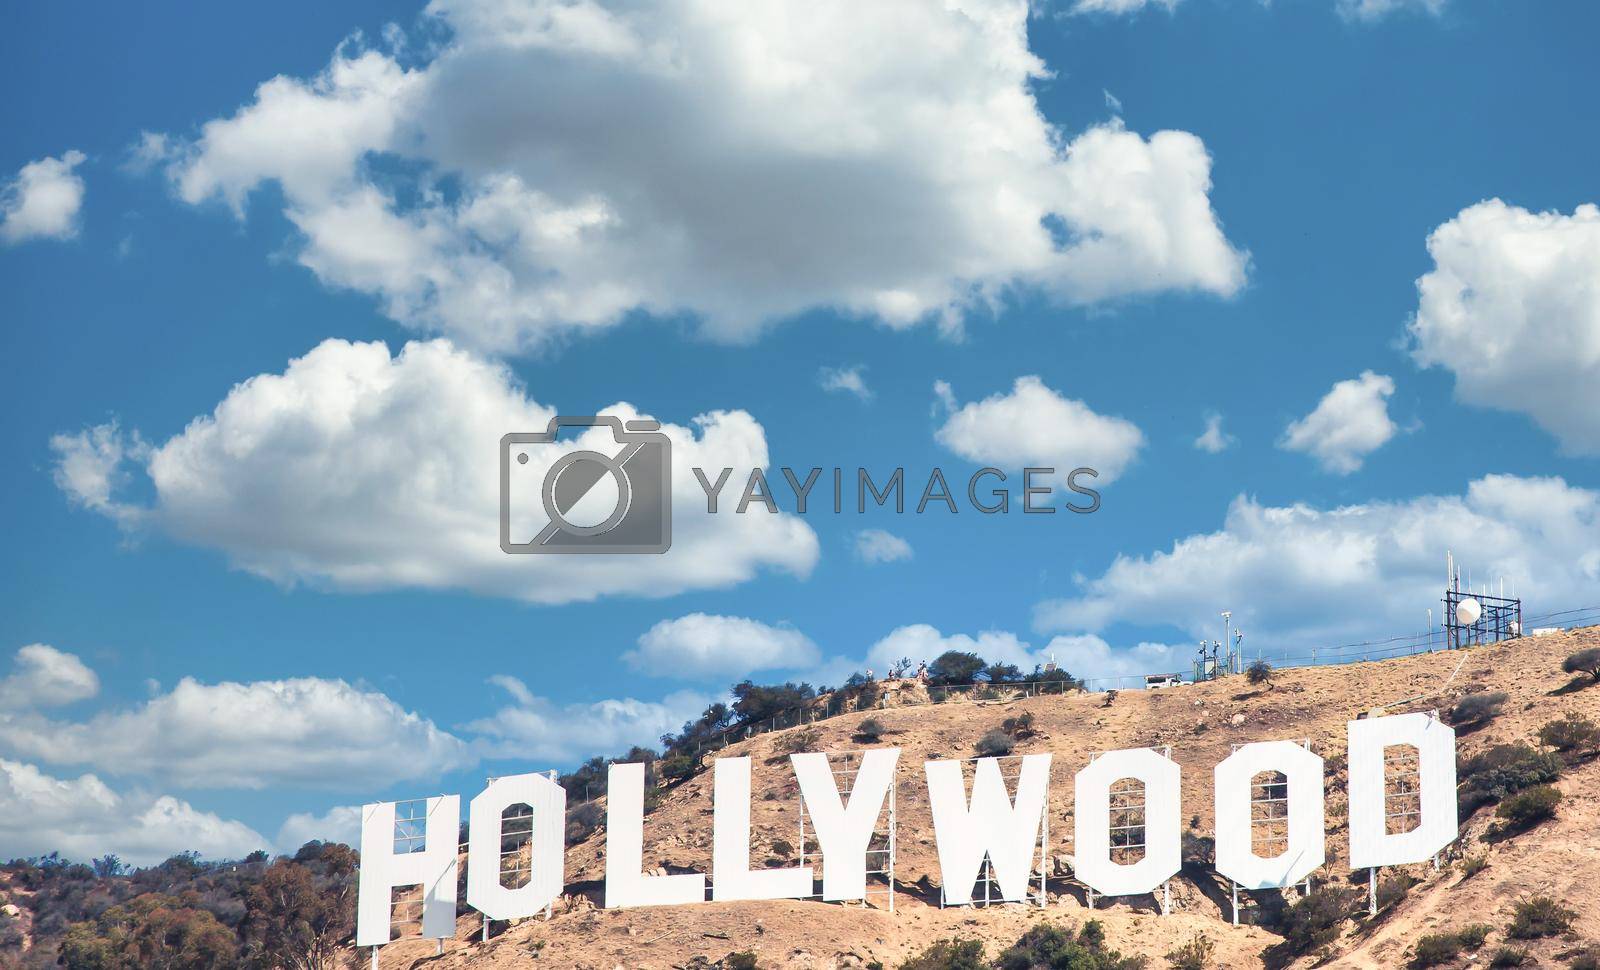 Royalty free image of Hollywood sign in Los Angeles on blue sky by Perseomedusa